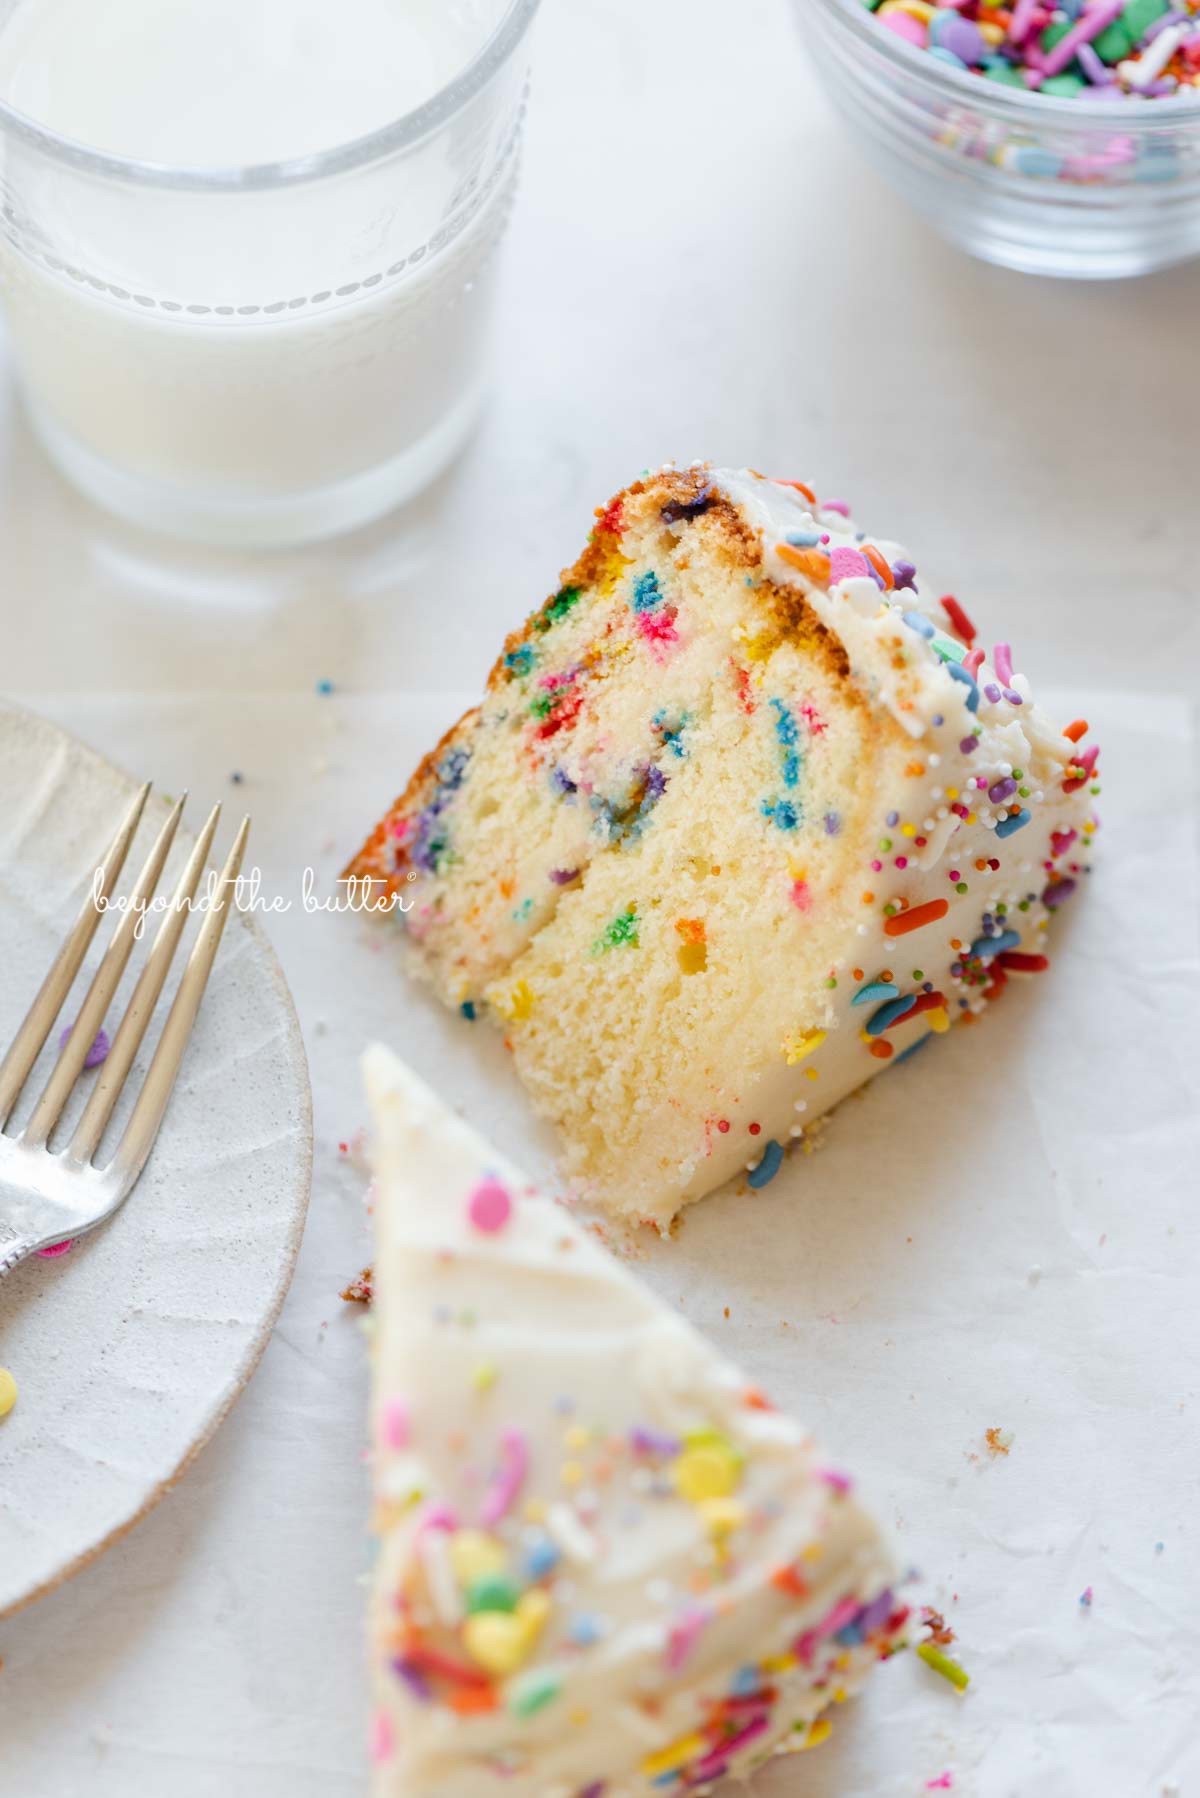 Slices of single layer funfetti cake on their side with a dessert plate, small fork, and glass of milk nearby from BeyondtheButter.com | All images © Beyond the Butter®